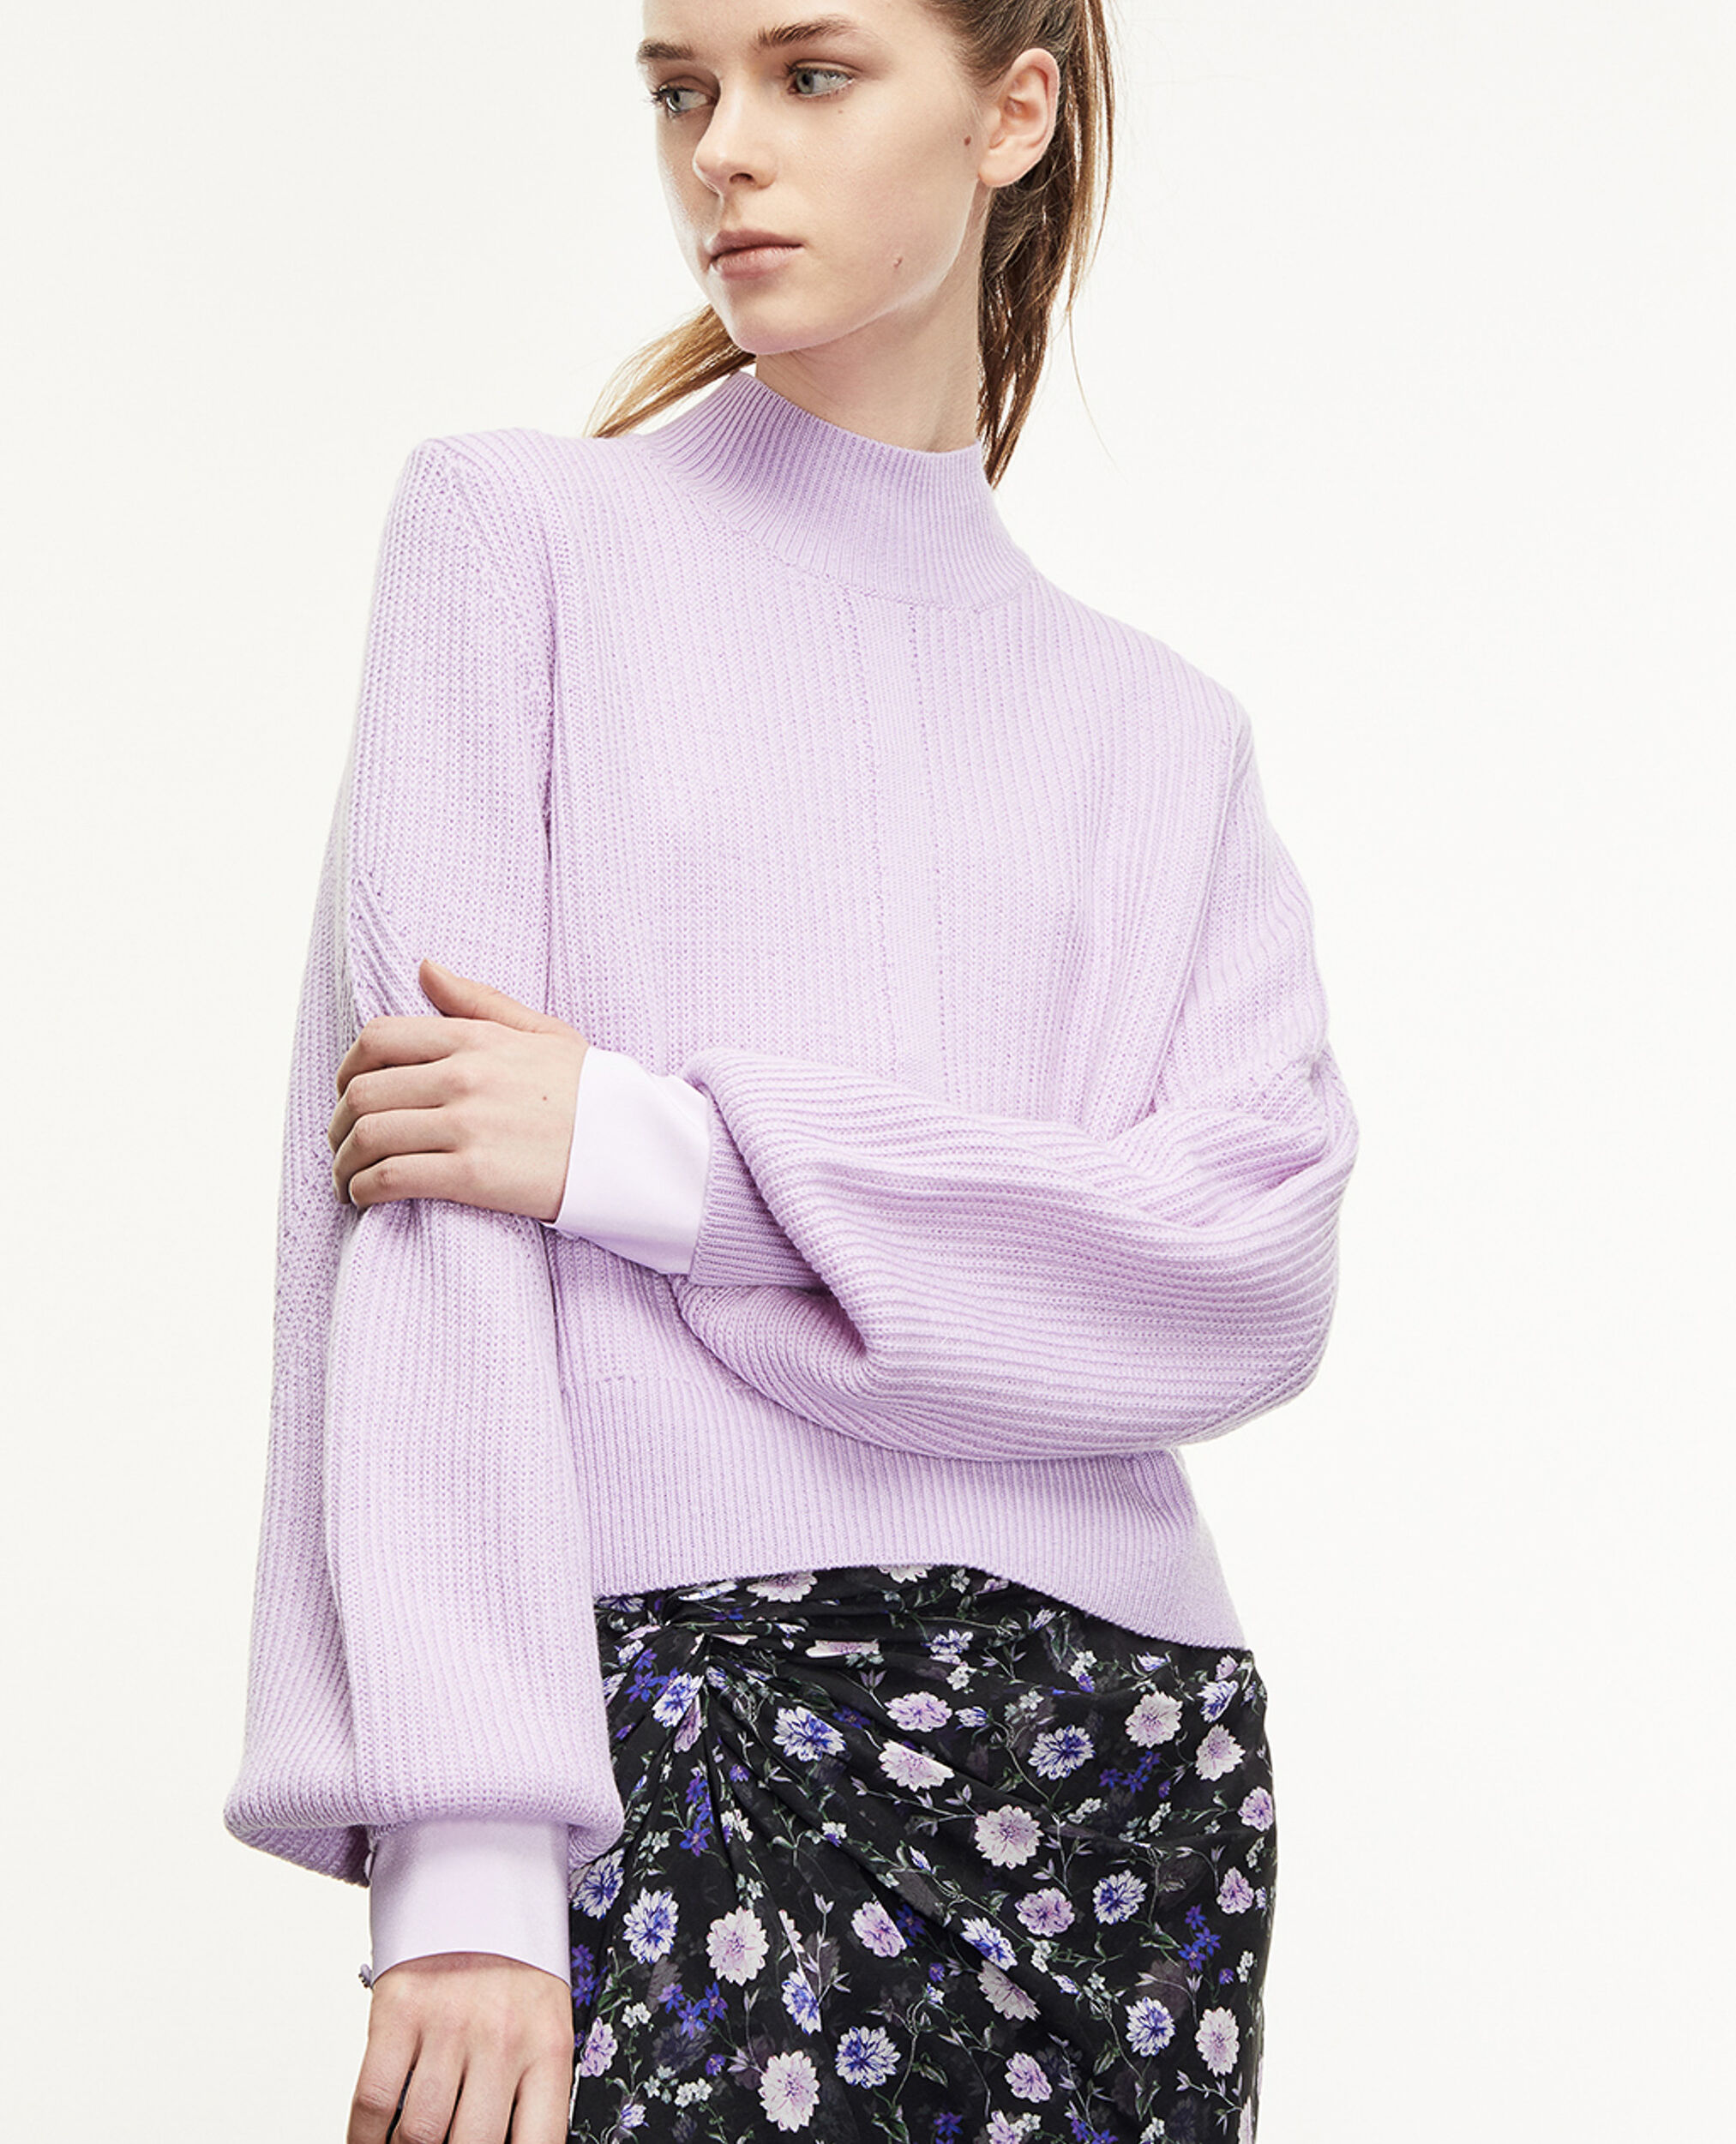 Pull lilas avec col montant, PURPLE, hi-res image number null